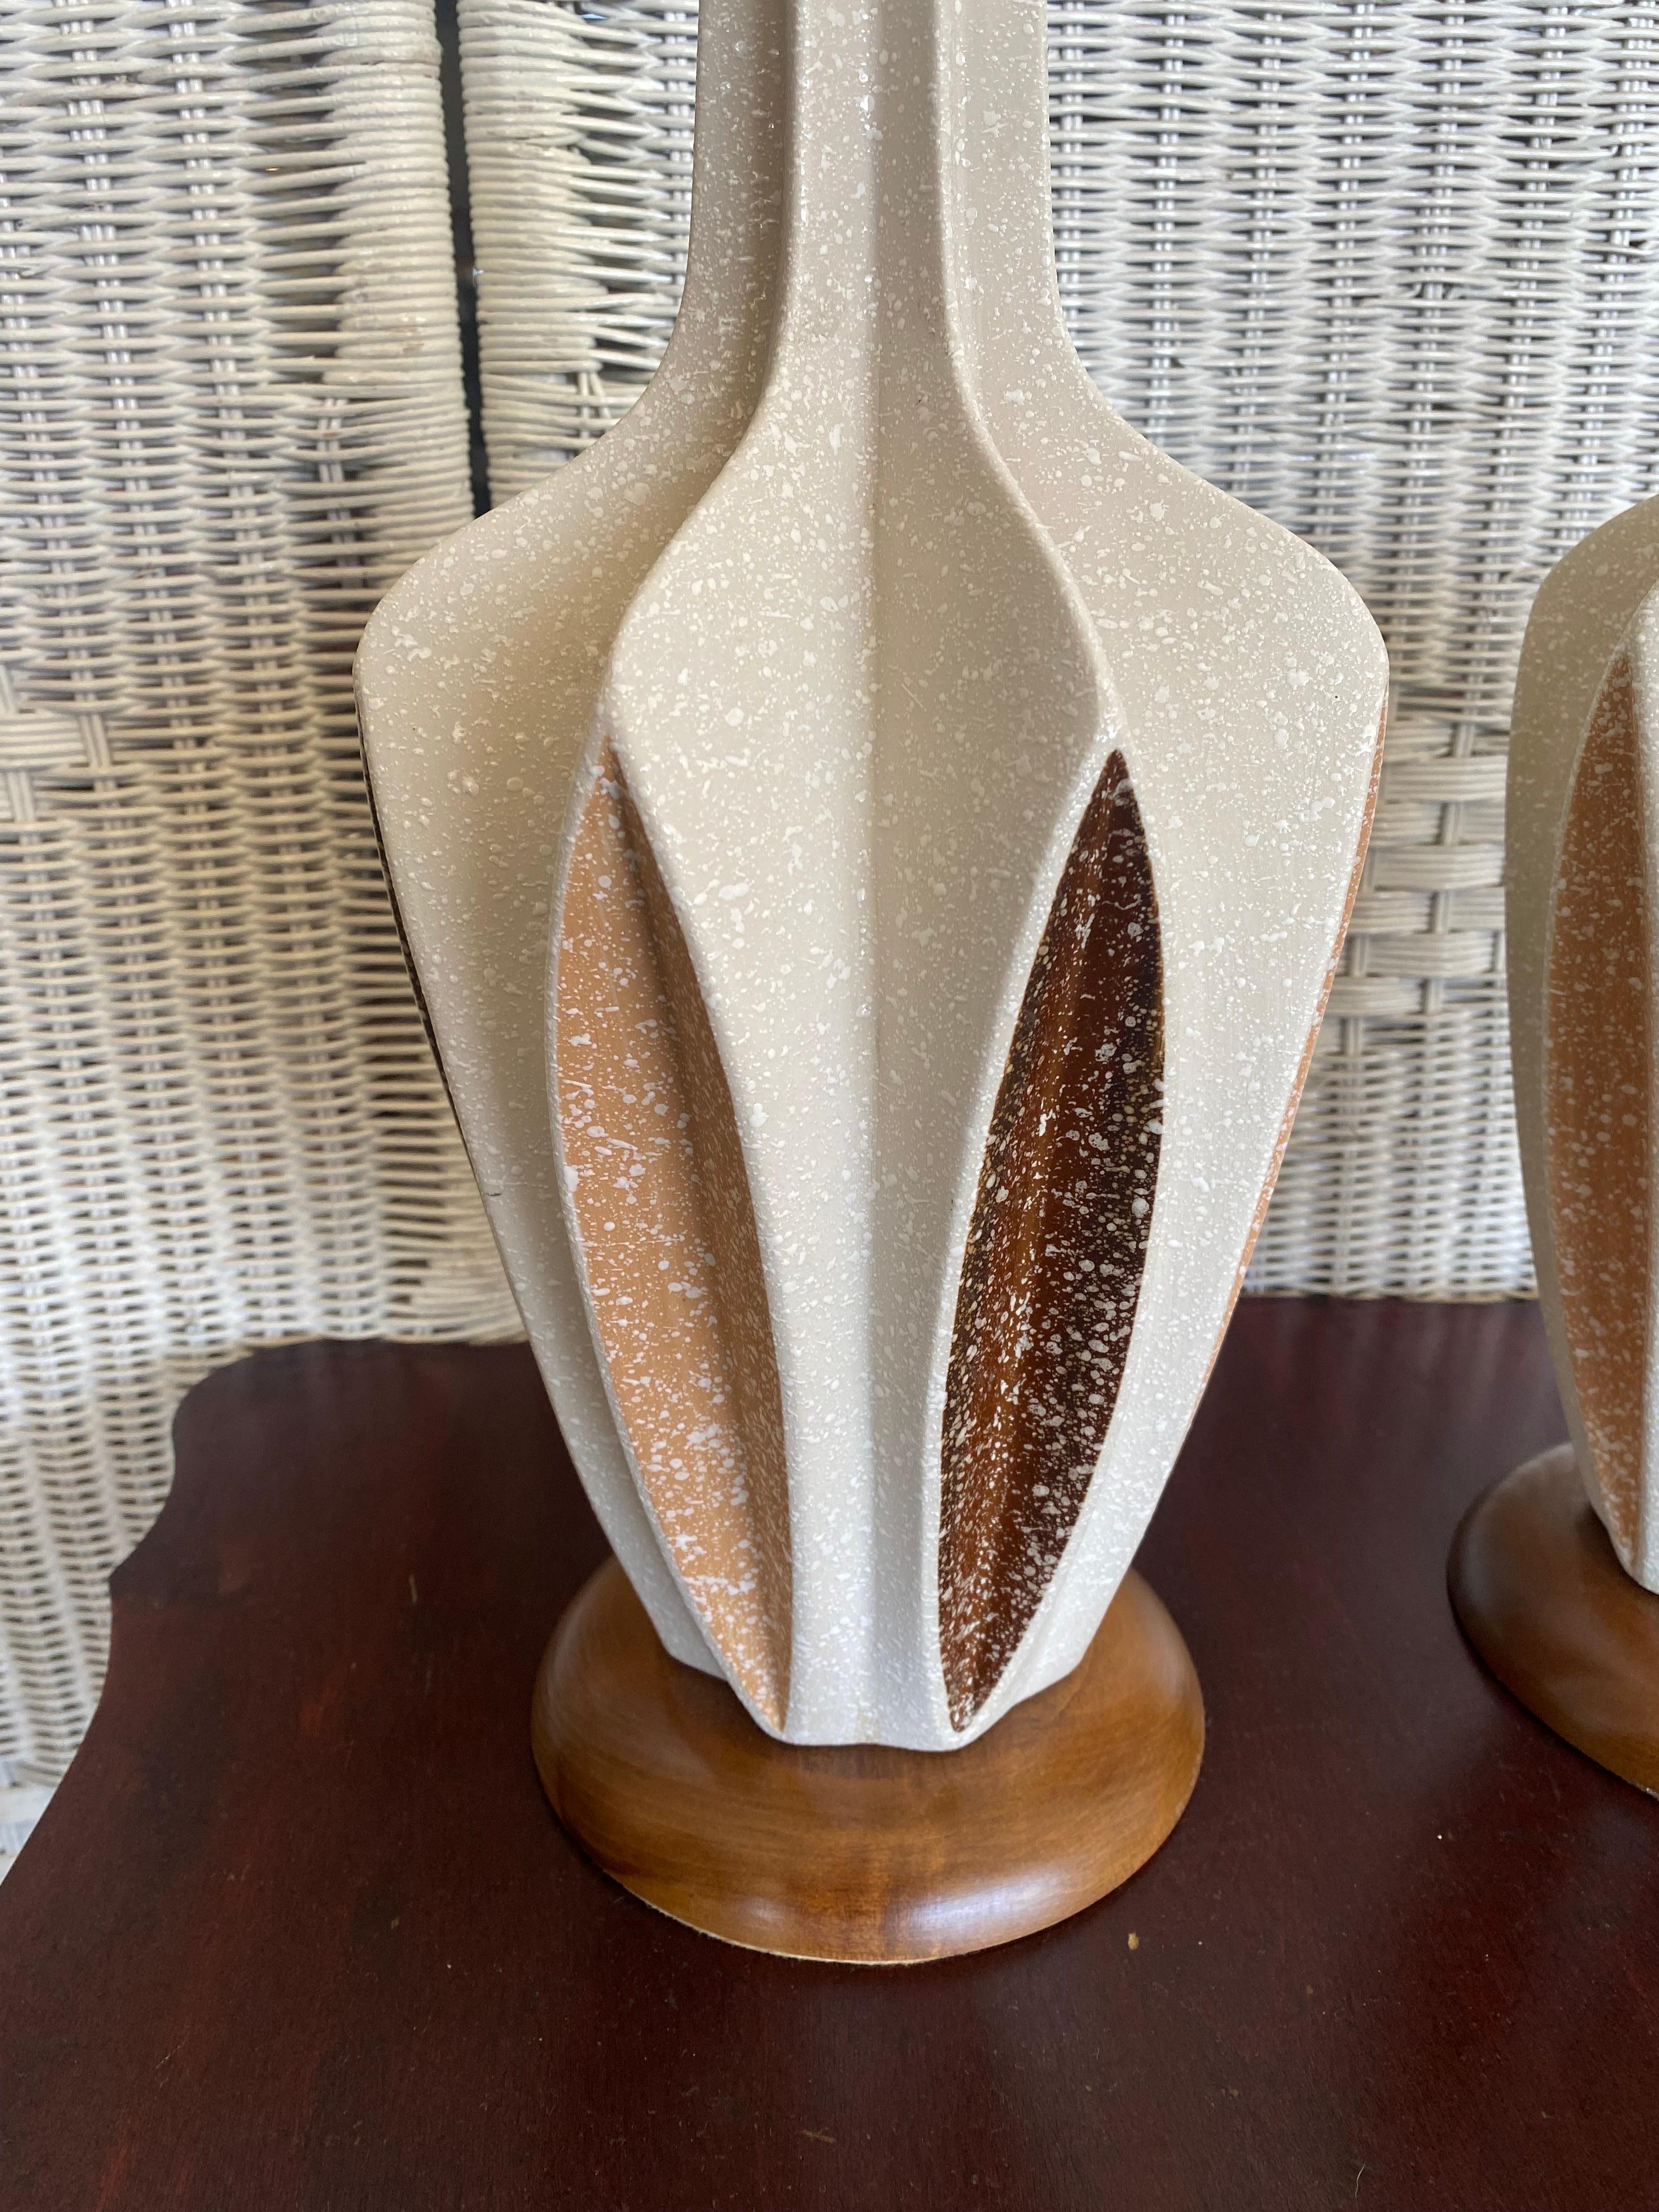 Beautiful and large pair of 1960s Modern Italian ceramic table lamps. This lamps stands out in a few different ways. First there's the off white or beige large body with 2 tones of brown, mocha and coffee to be more specific, as prominent accent